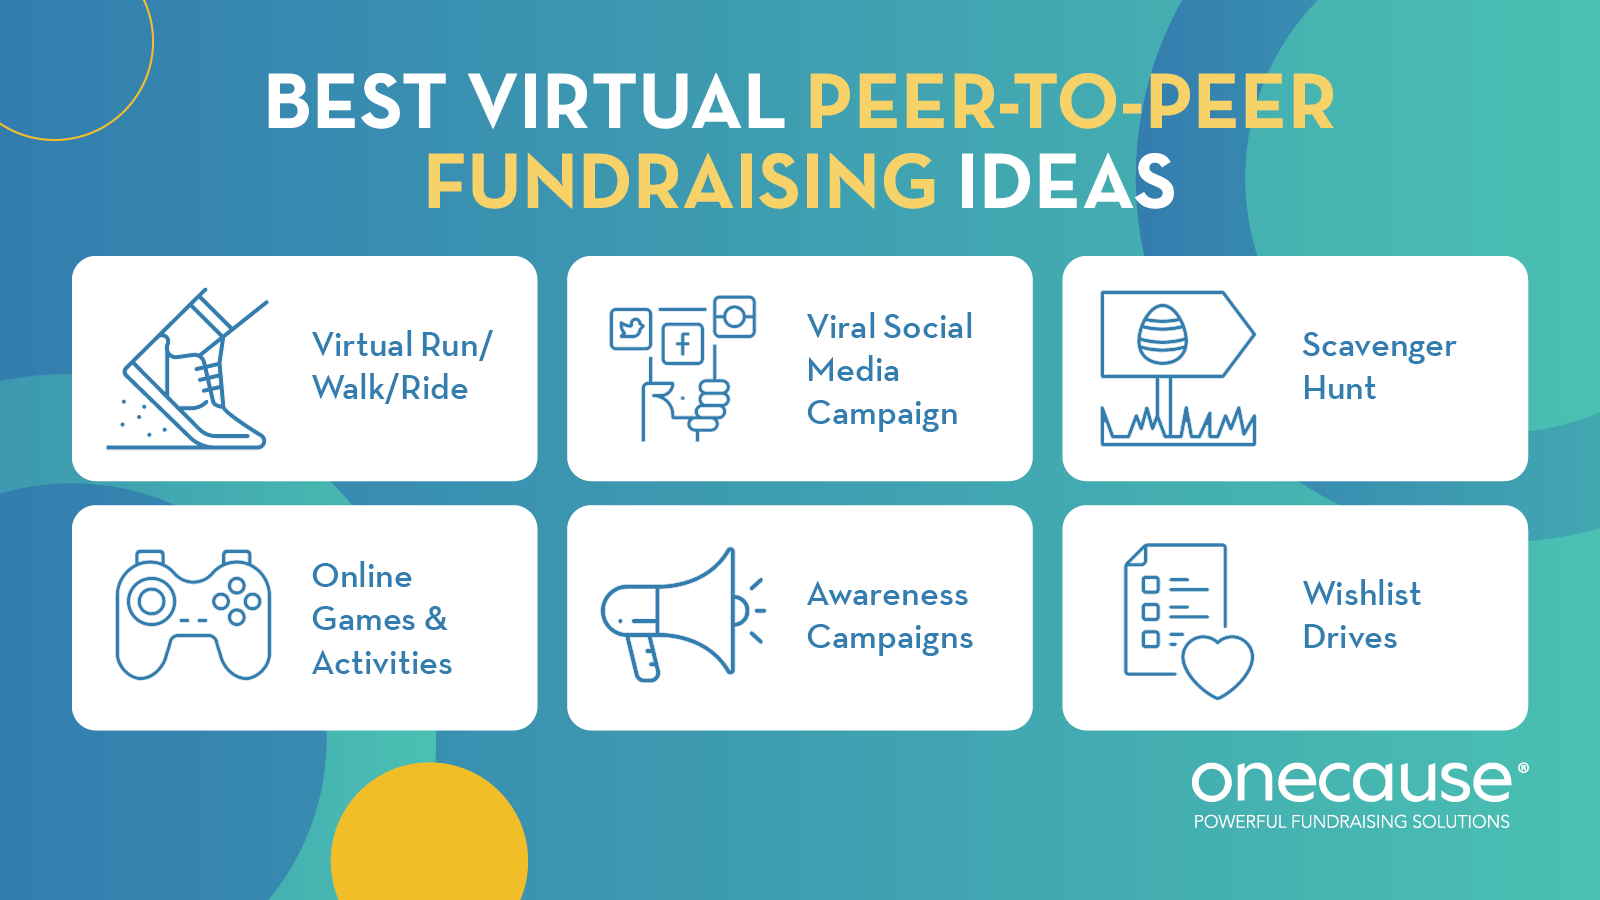 This image lists the best virtual peer-to-peer fundraising ideas, also covered in the text below.